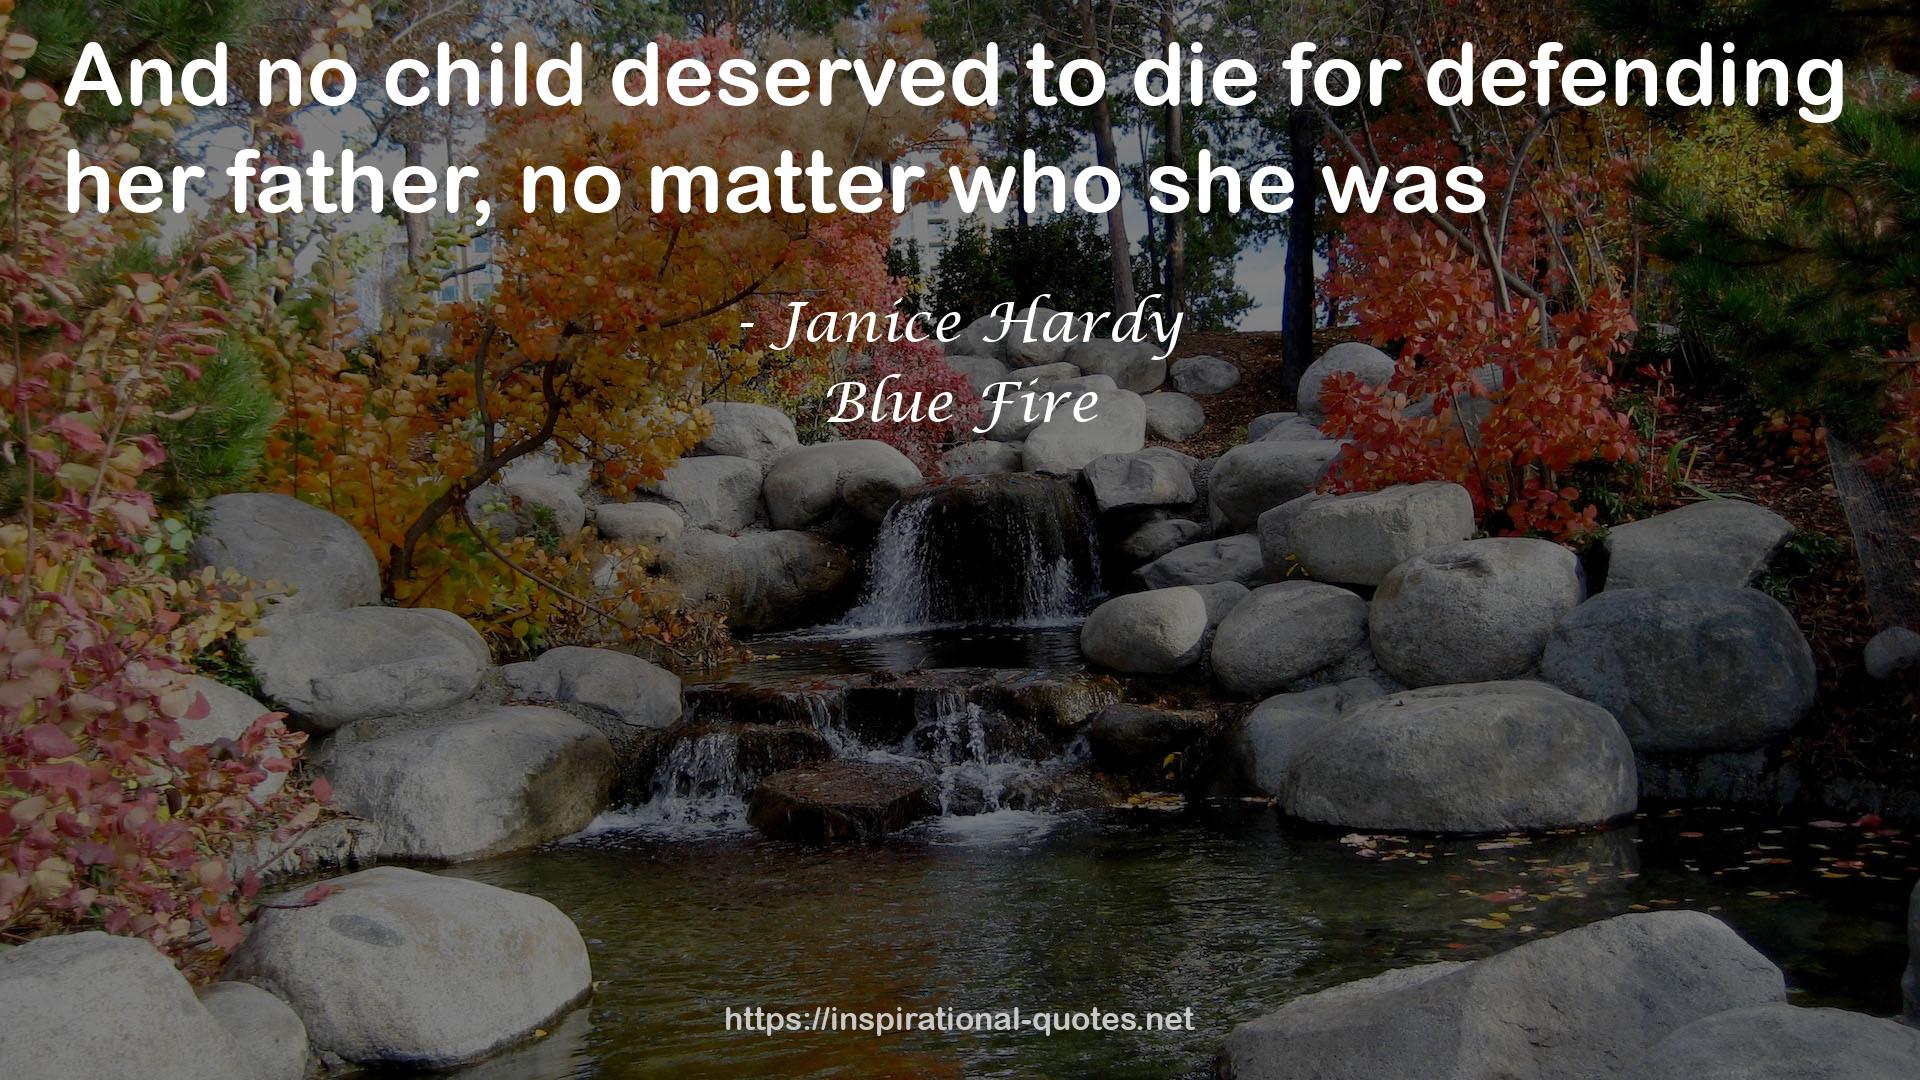 Janice Hardy QUOTES